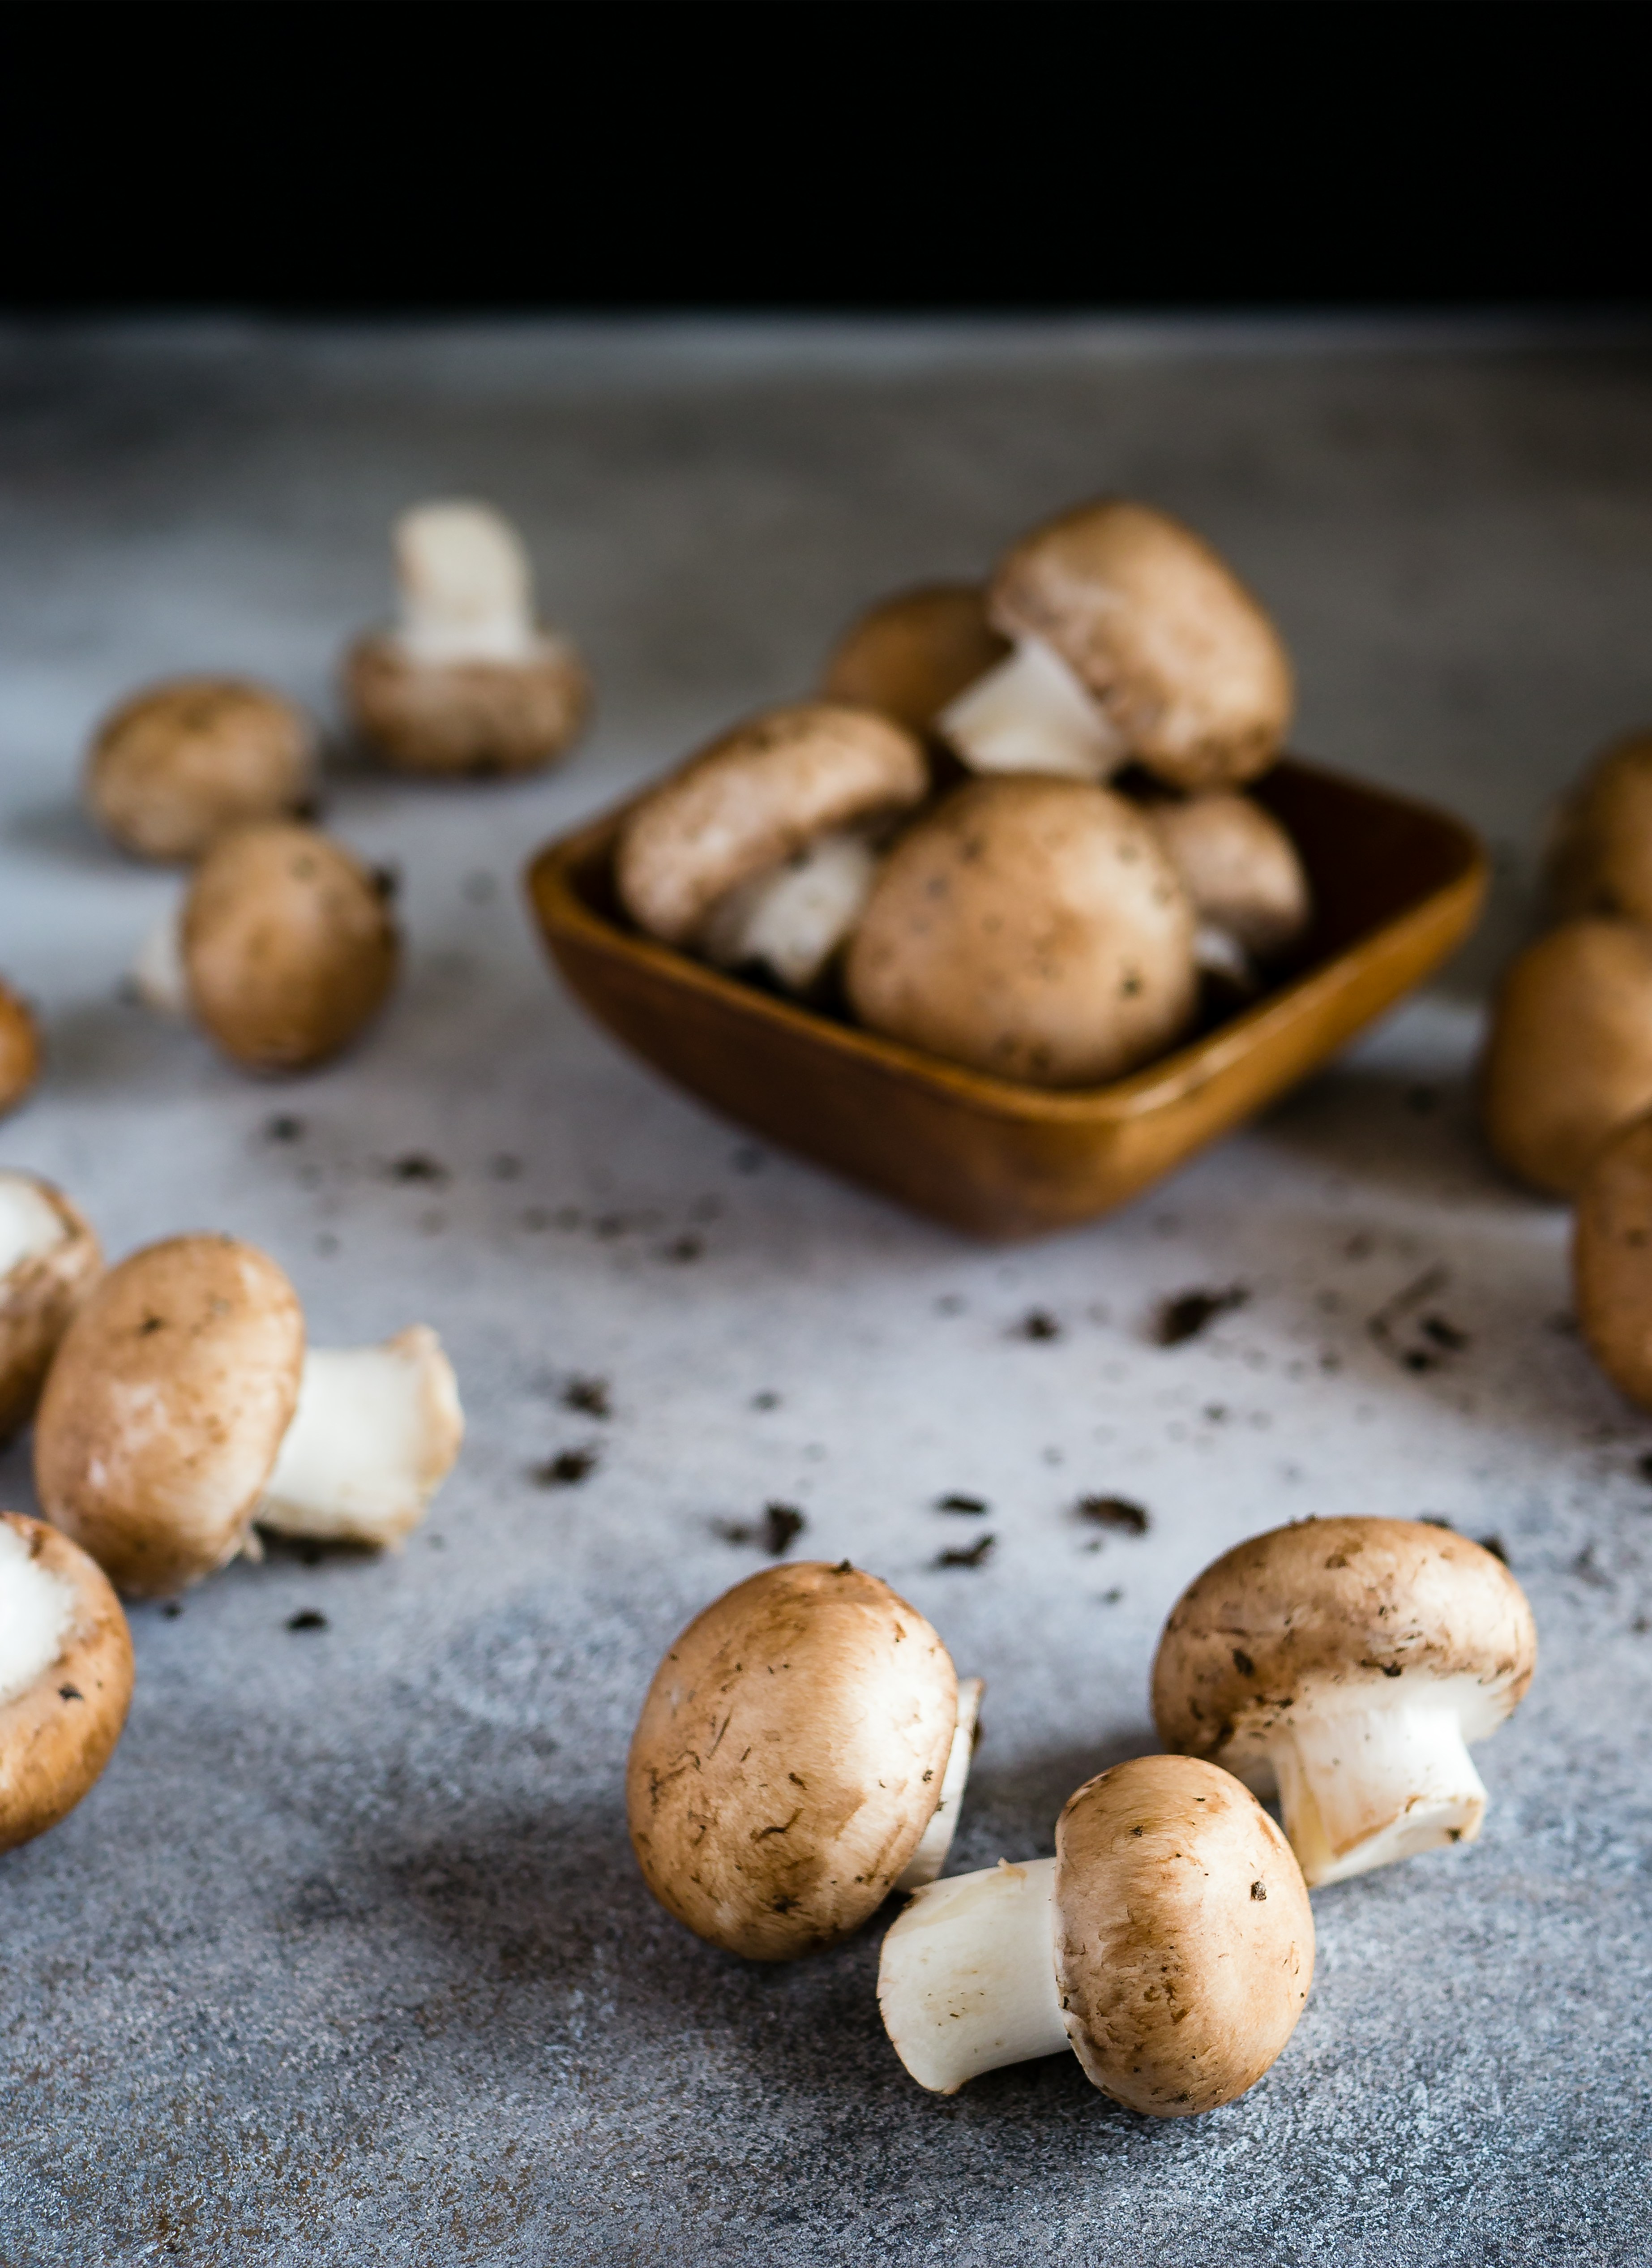 Exploring the Nutritional and Culinary Benefits of Mushrooms